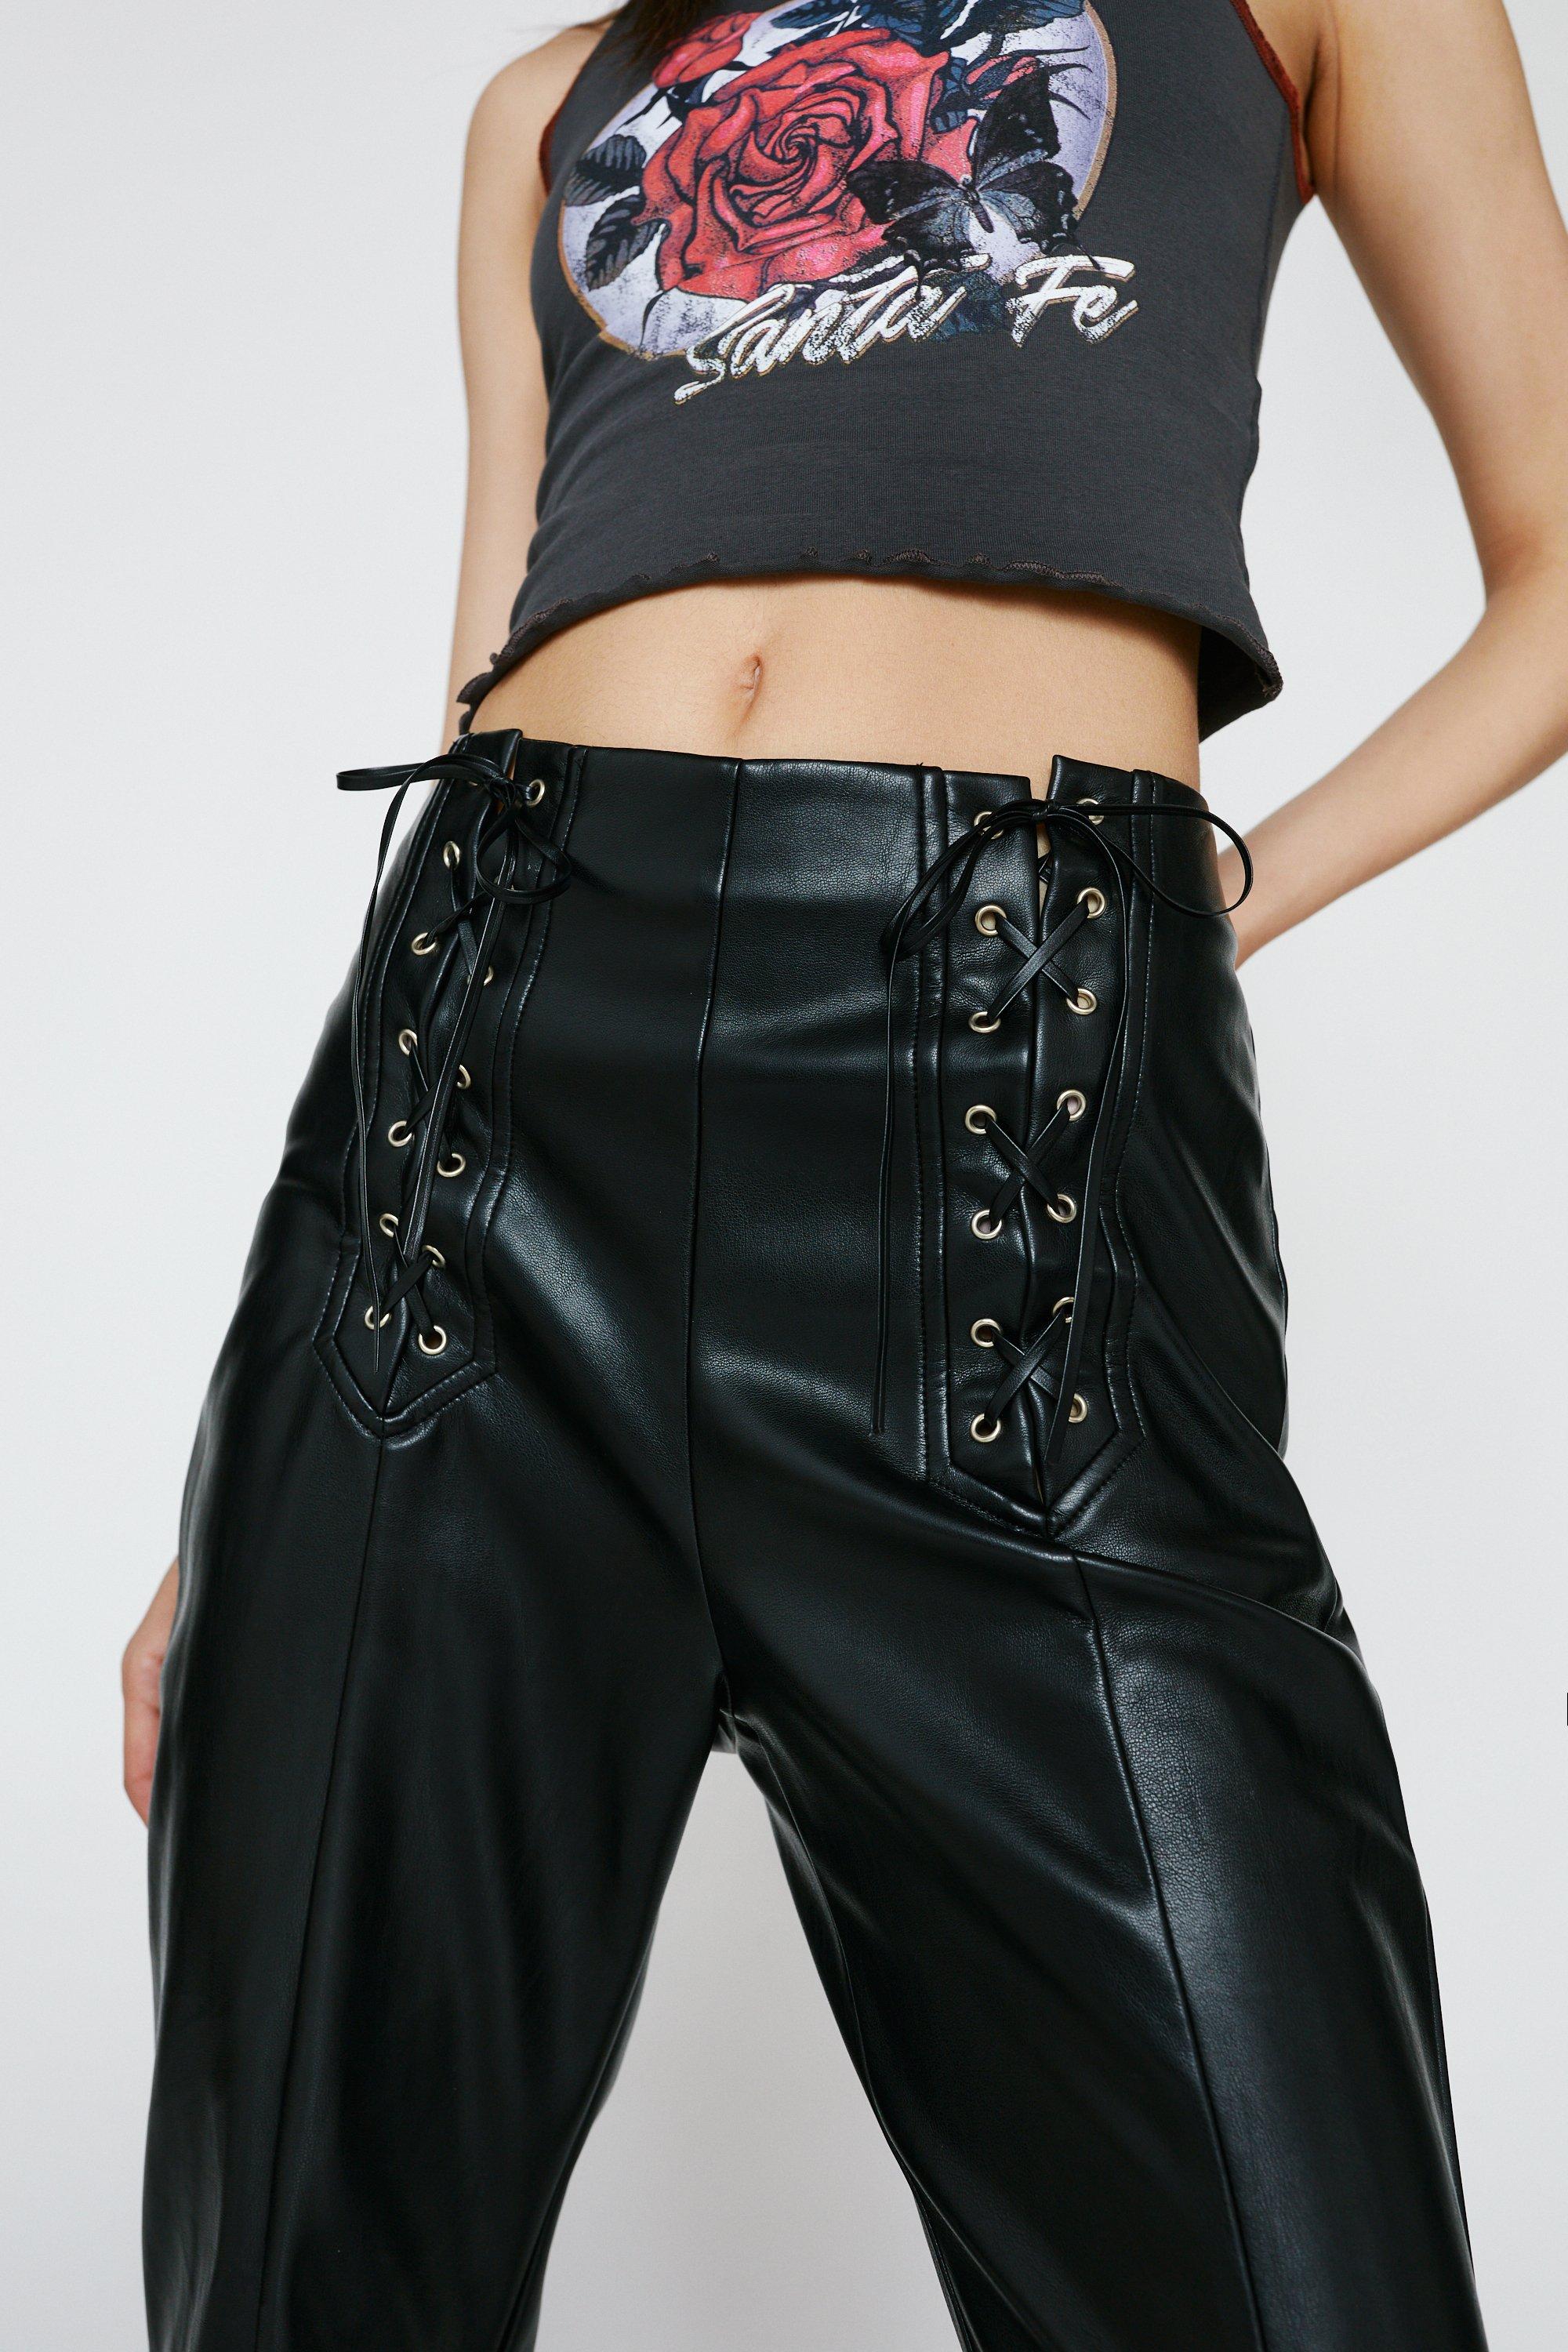 Faux Leather Lace up Crop Top, Pu Leather Crop Top, Lace up Crop Top,  Festival Crop Top, Faux Leather Crop Top 